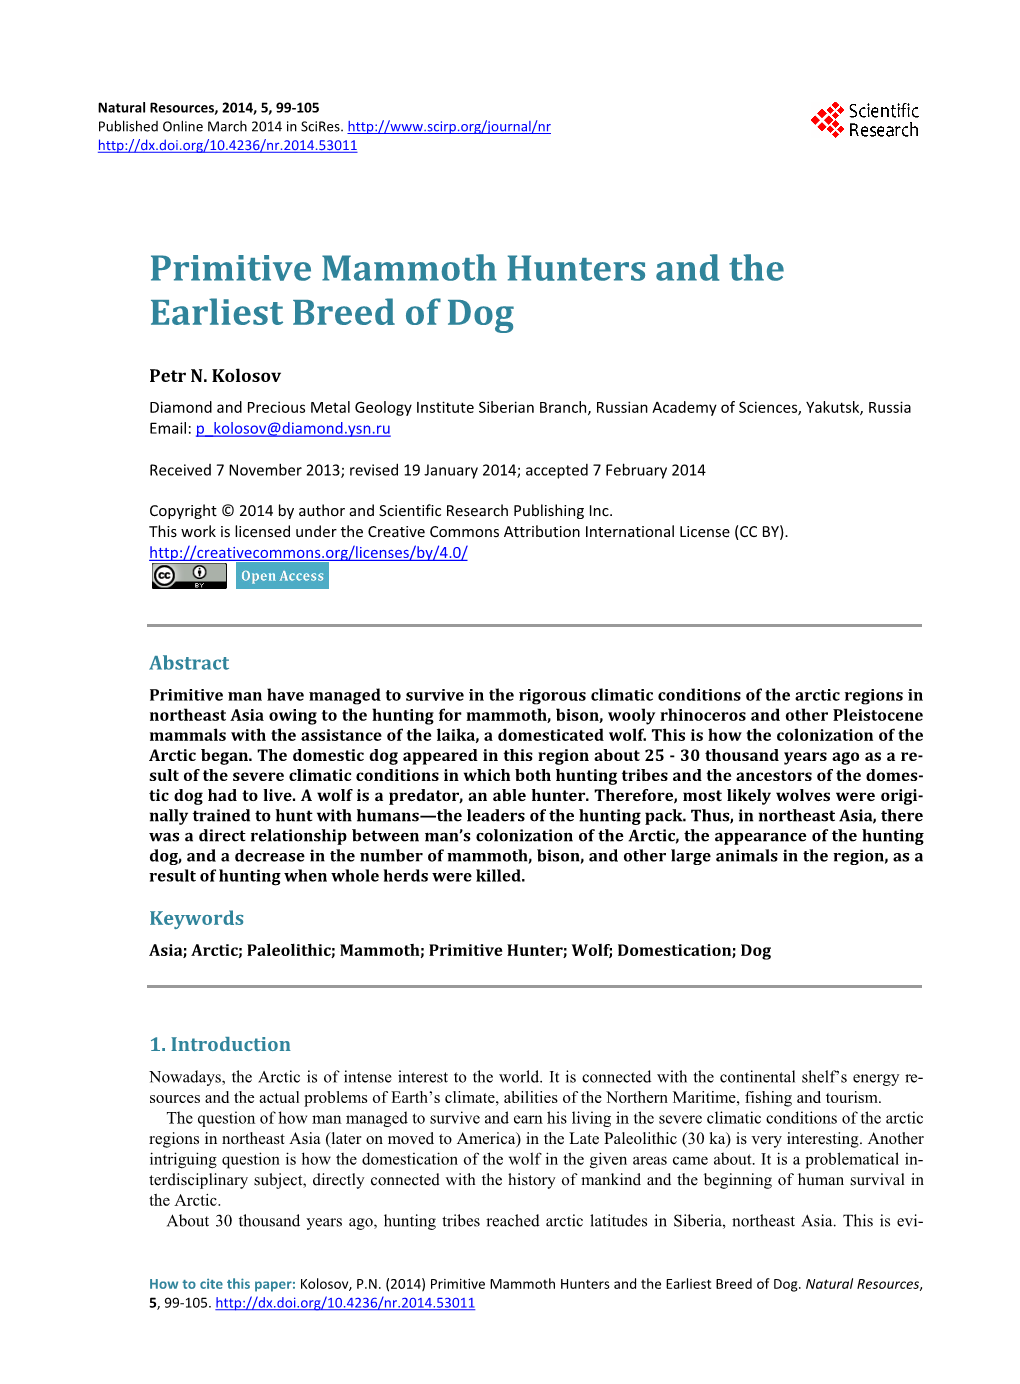 Primitive Mammoth Hunters and the Earliest Breed of Dog